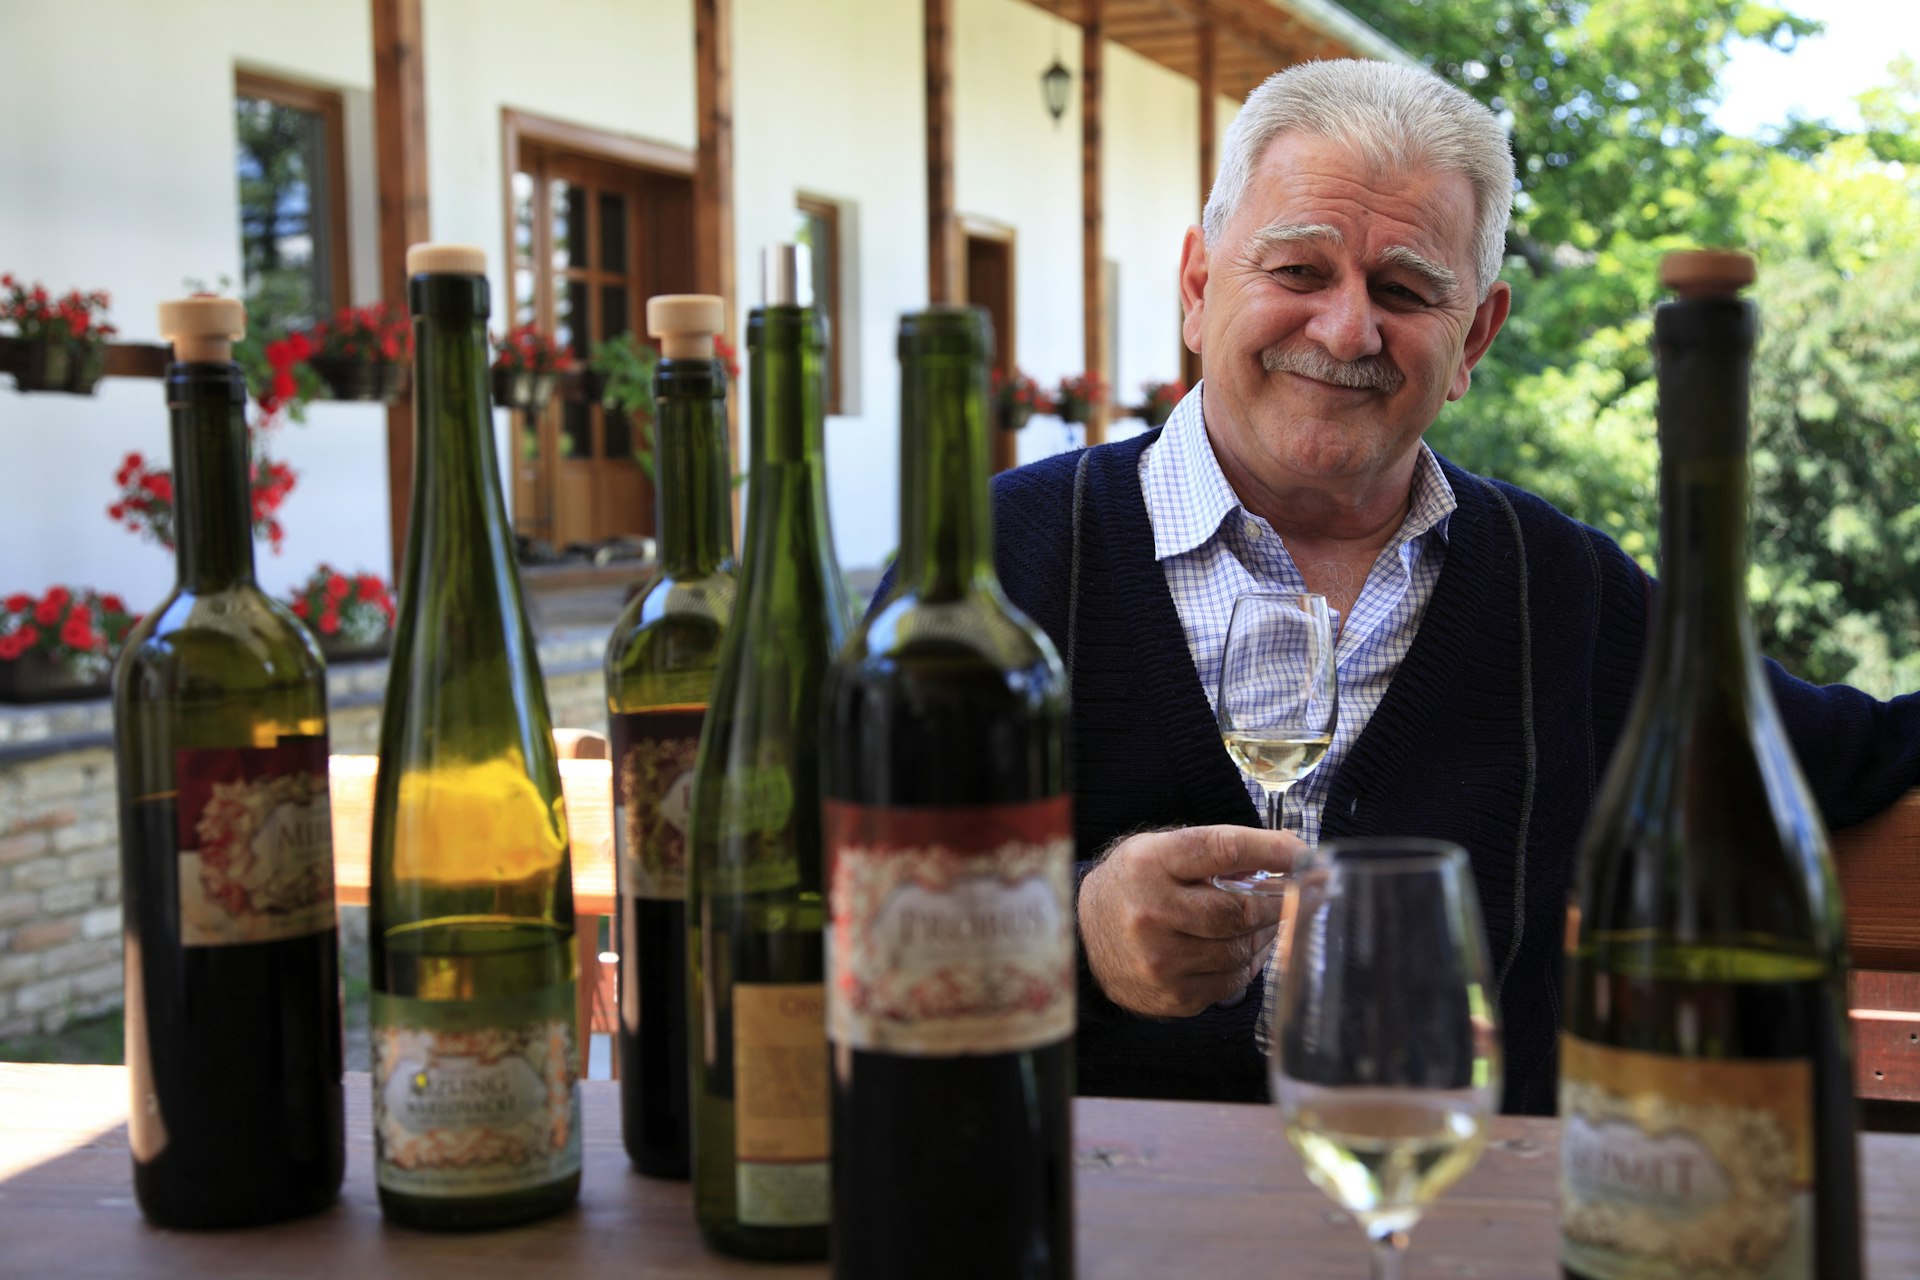 A wine maker sits in front of several bottles of wine as he hosts a wine tasting